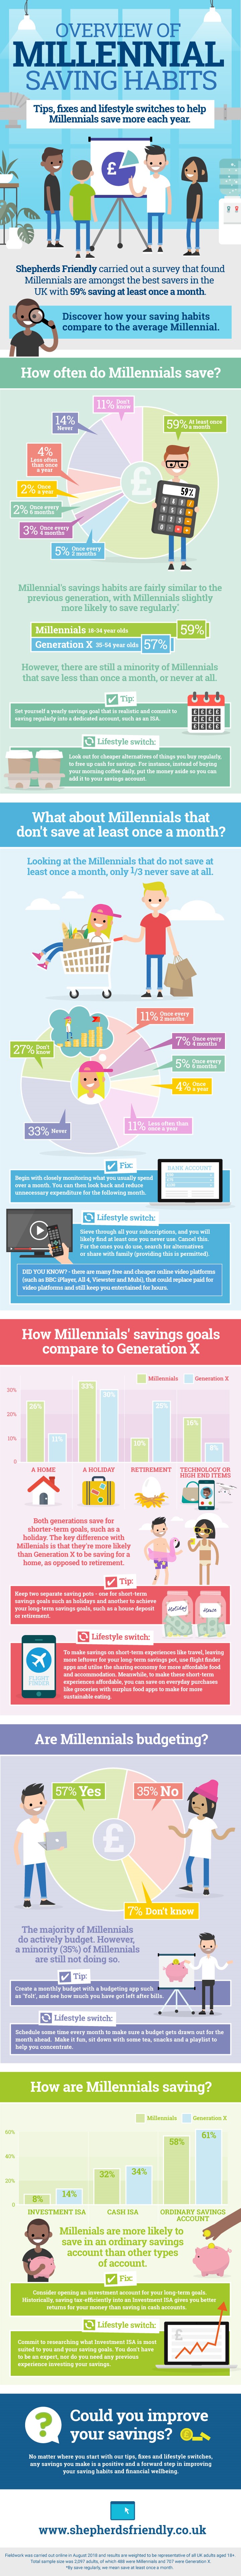 Millennial savings habits: Tips, fixes and lifestyle switches